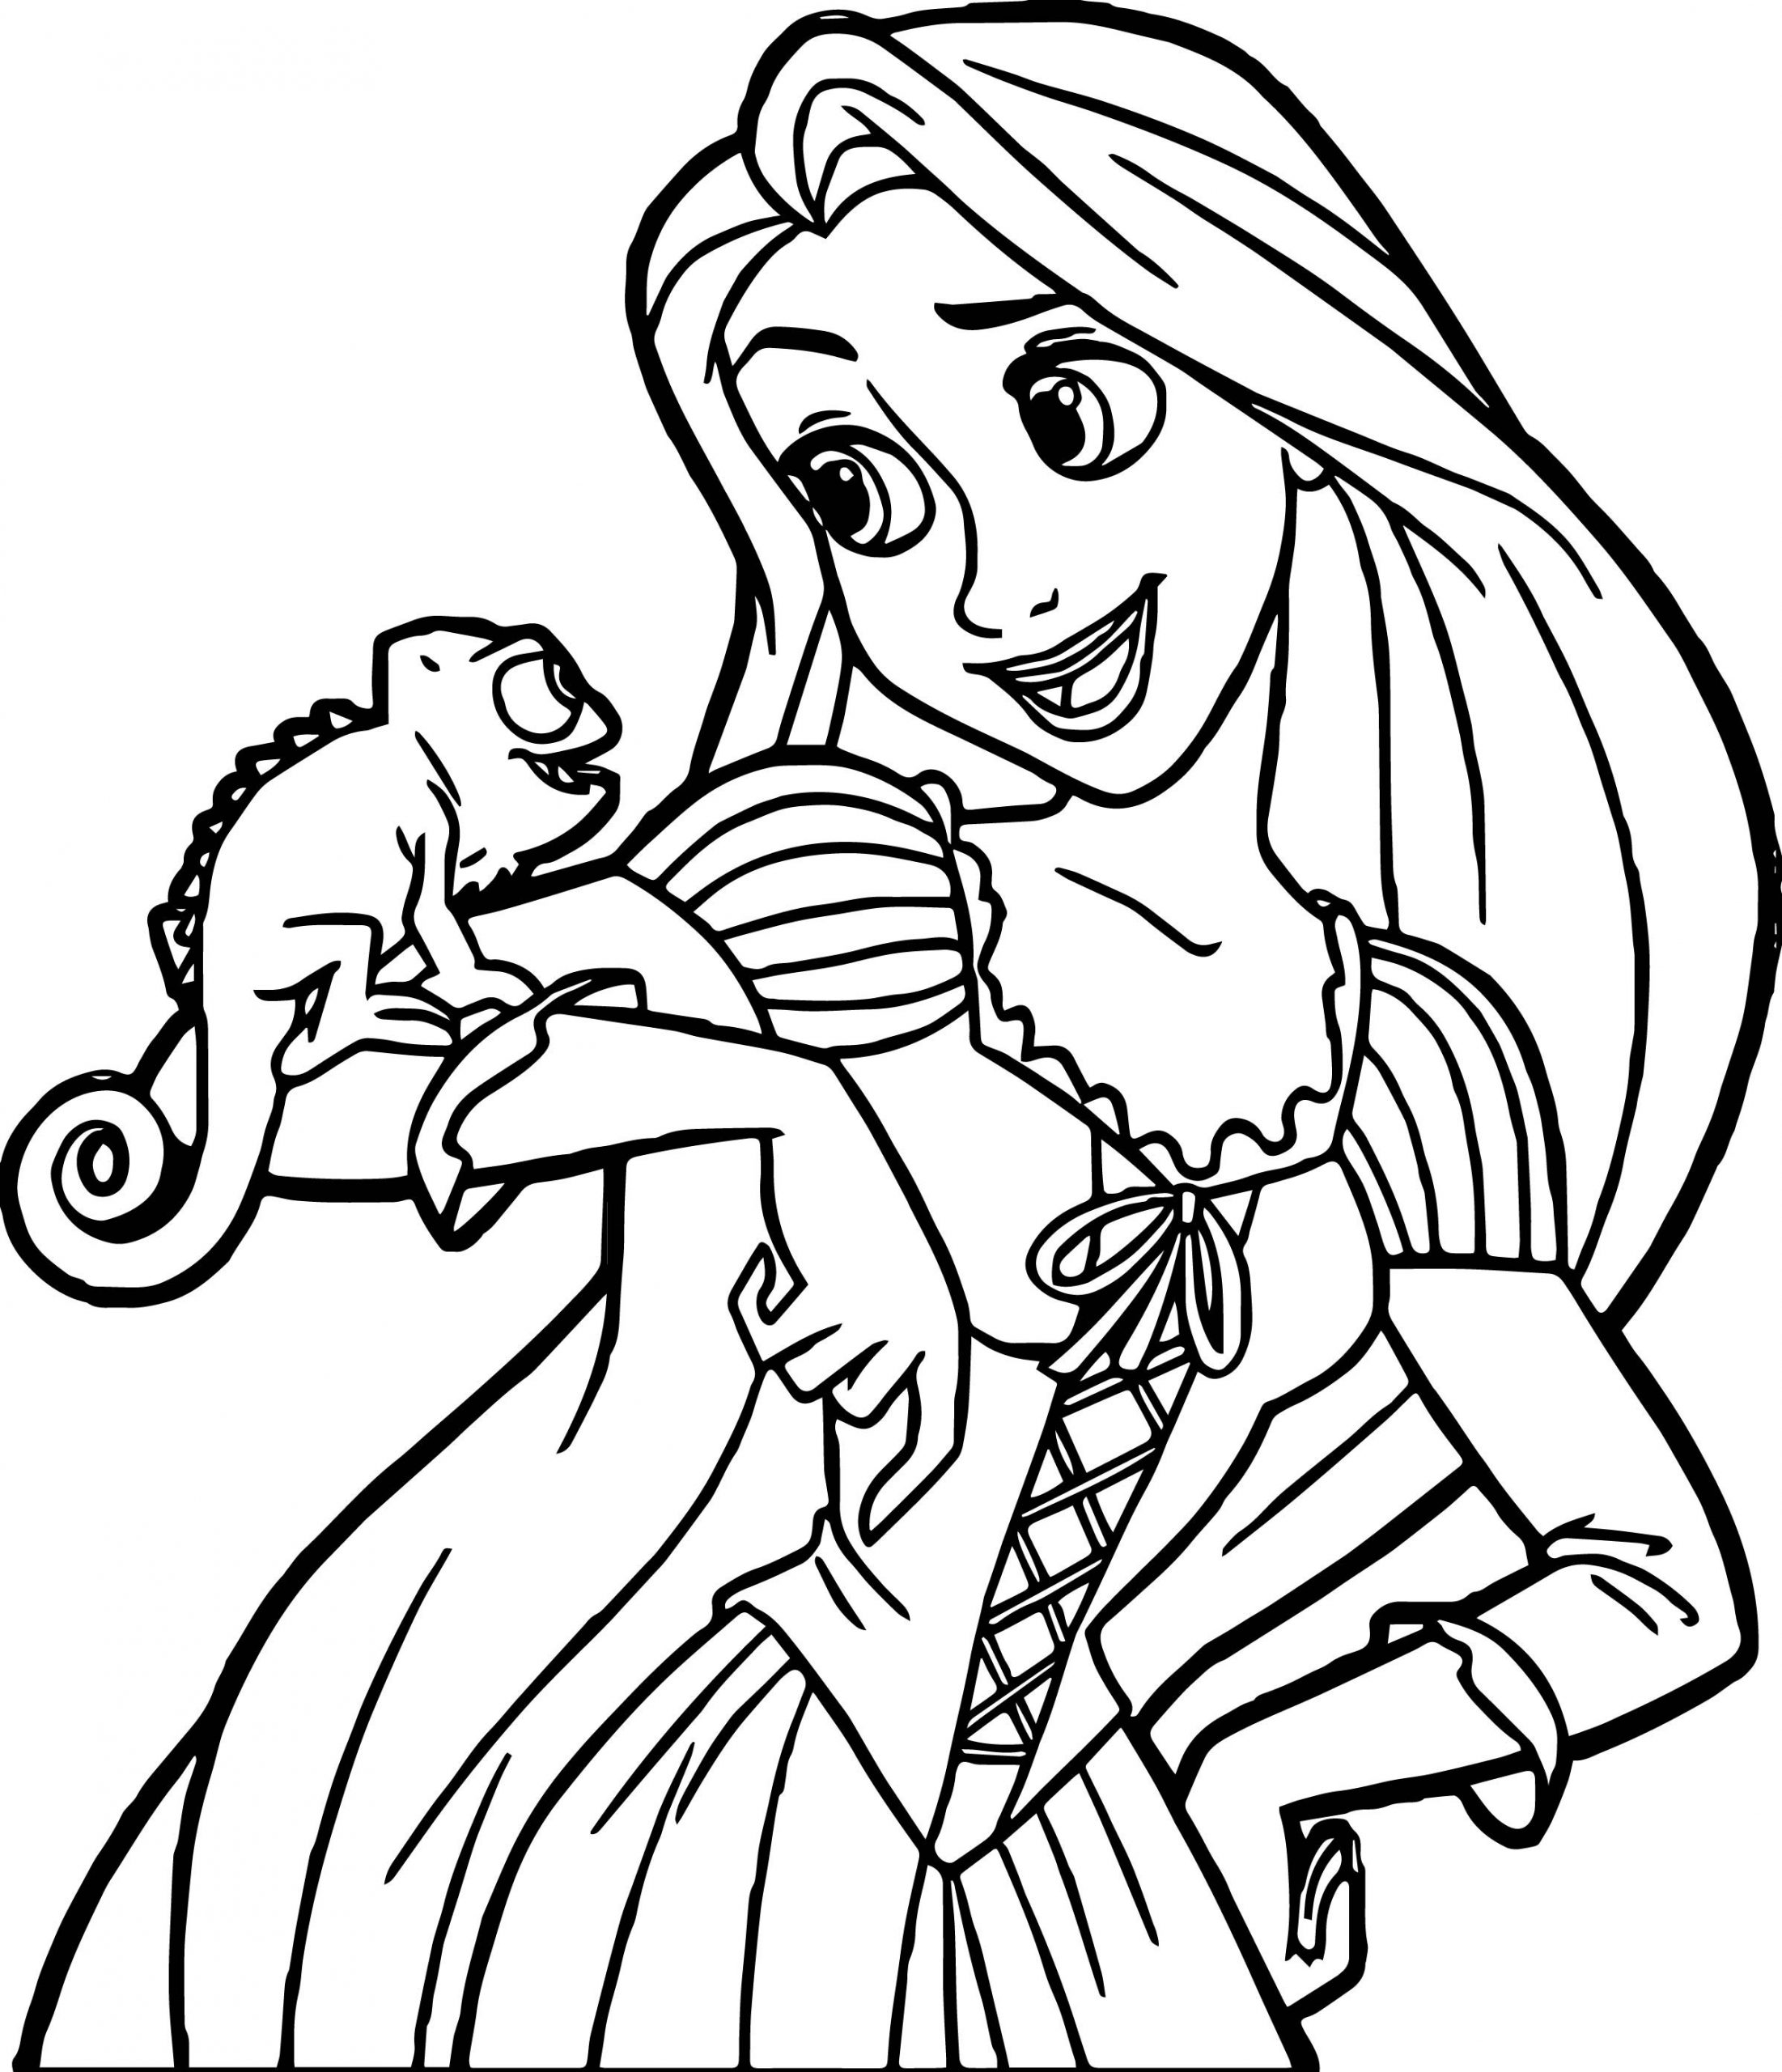 Rapunzel Coloring Pages For Kids Visual Arts Ideas